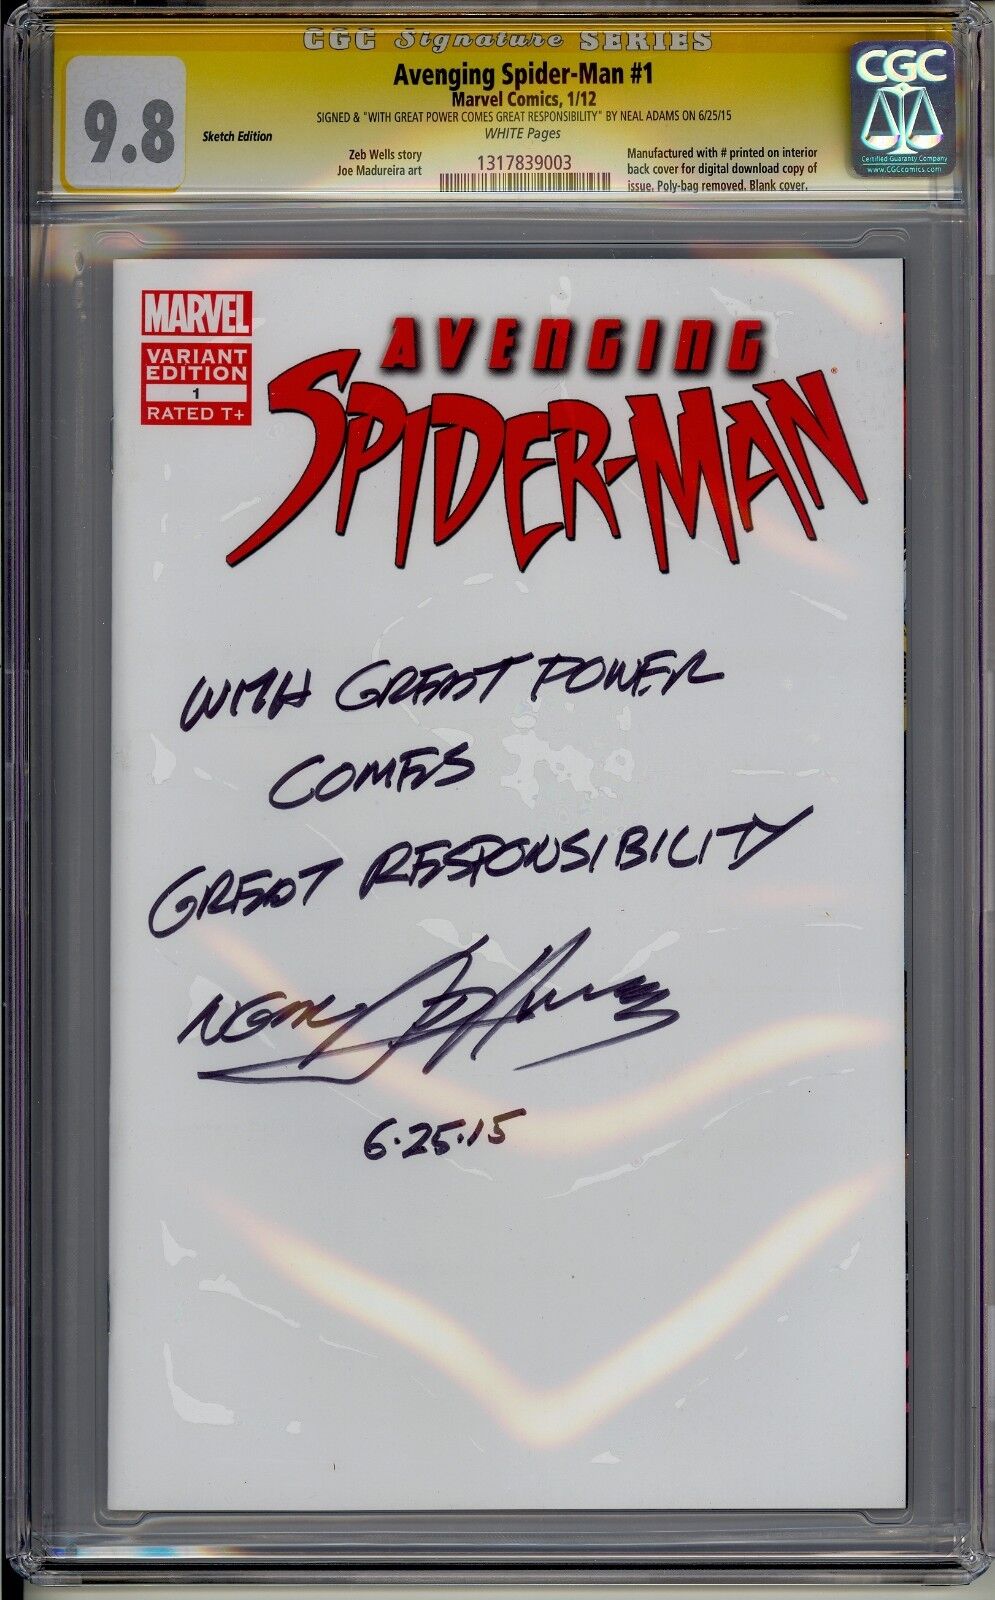 AVENGING SPIDER-MAN #1 CGC SS 9.8 NEAL ADAMS WRITES FAMOUS STAN LEE QUOTE